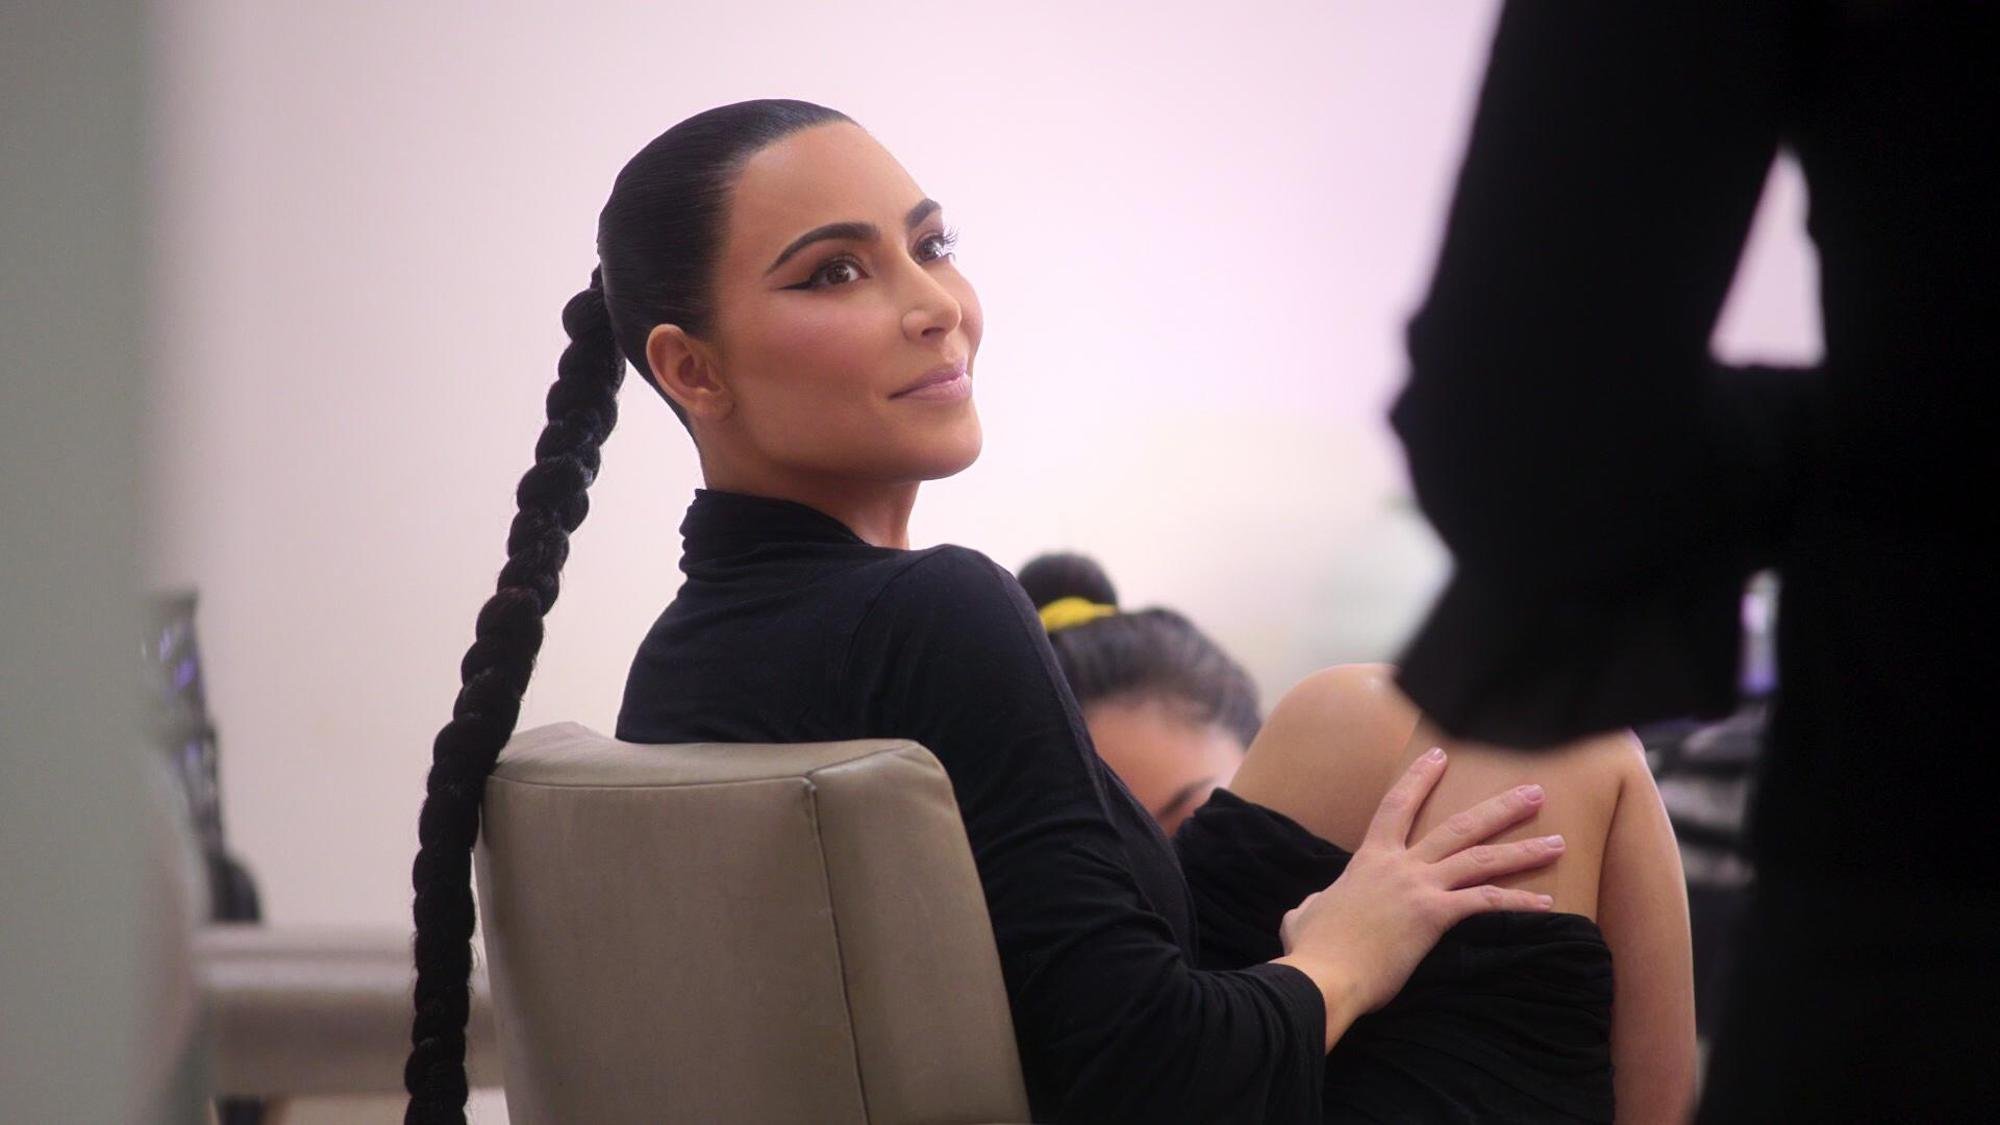 'The Kardashians' Episode 7 recap of "Where I've Been and Where I Wanna Go' features Kim Kardashian preparing for a photo shoot, seen here in a production still.